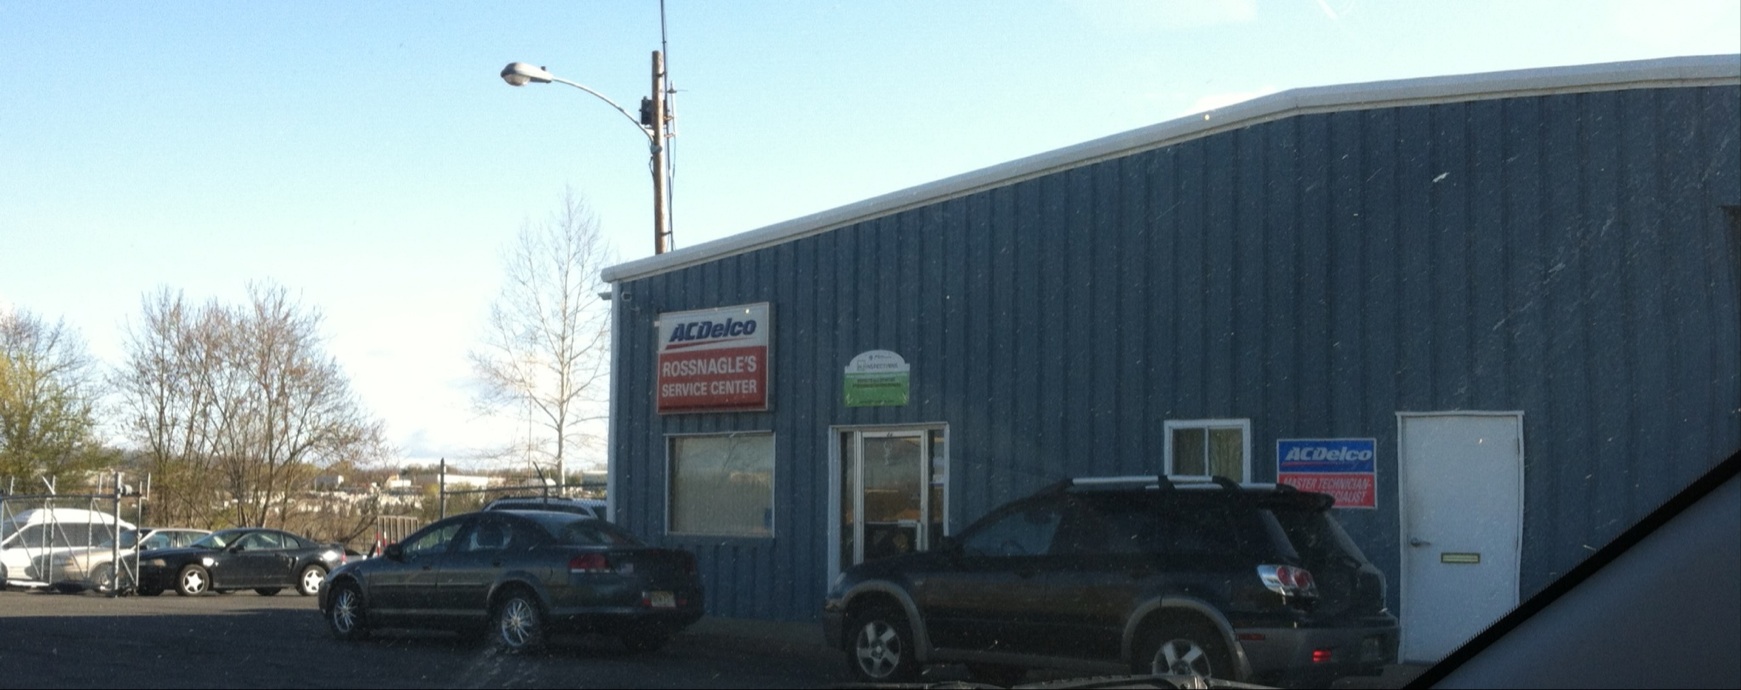 Rossnagle's Service Center